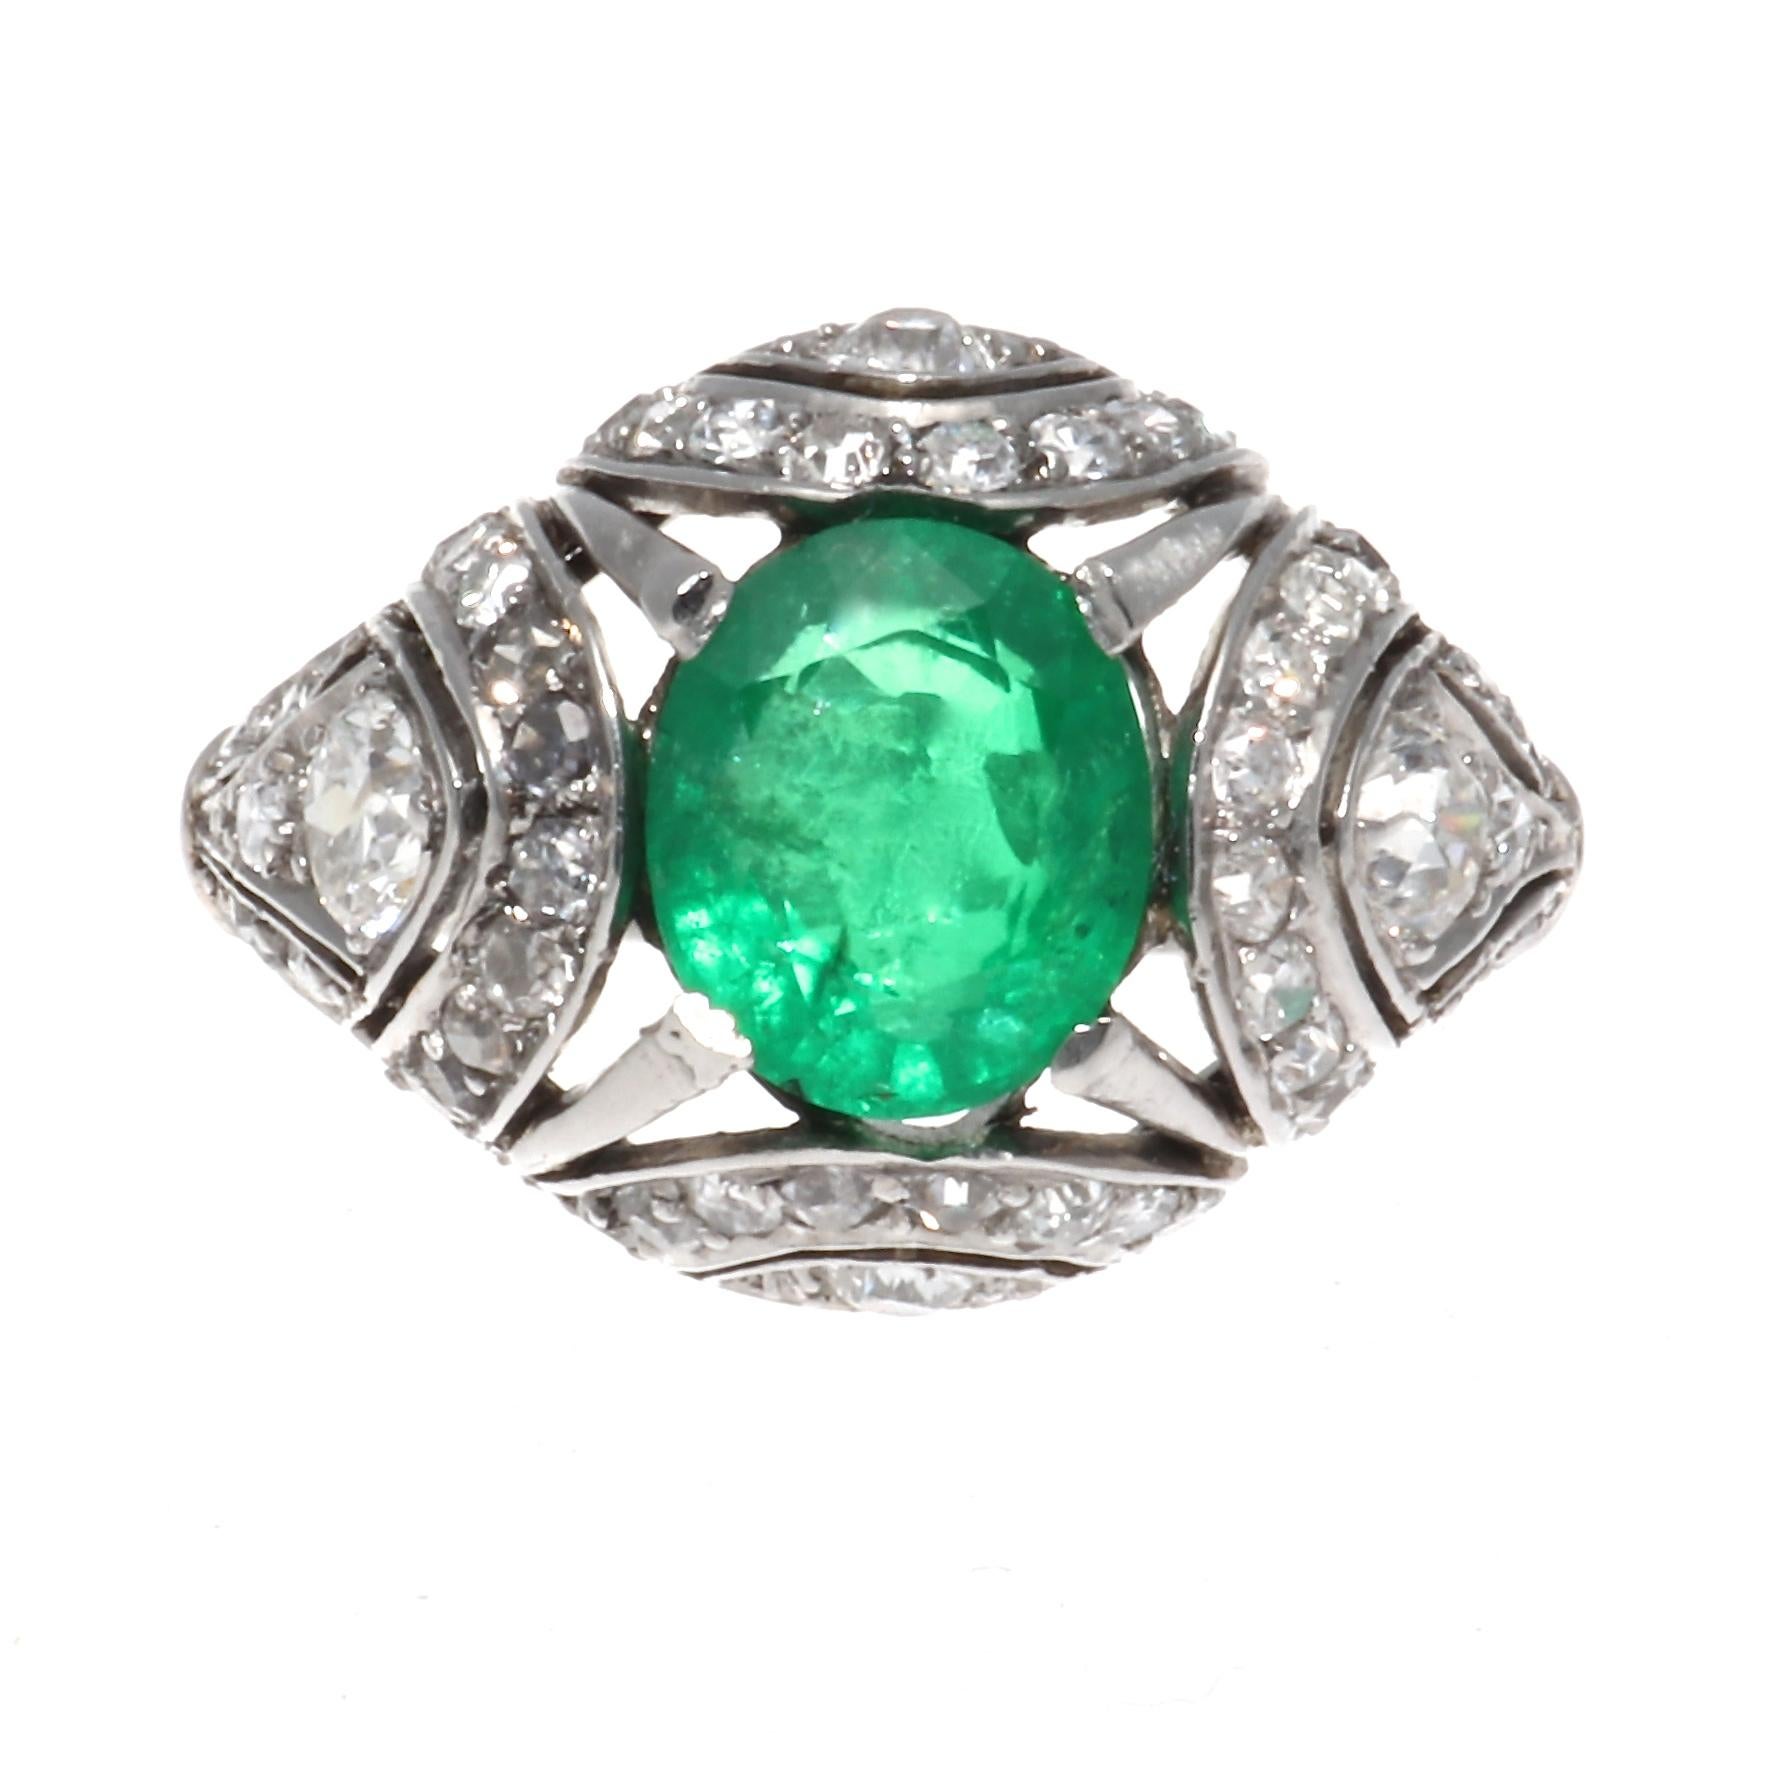 Iconic design that emulates the essence of Art Deco  with geometric shapes and colorful gemstones. Featuring a glowing green emerald weighing approximately 1.30 carats captured in a web of diamonds and finely crafted platinum. Stamped with French